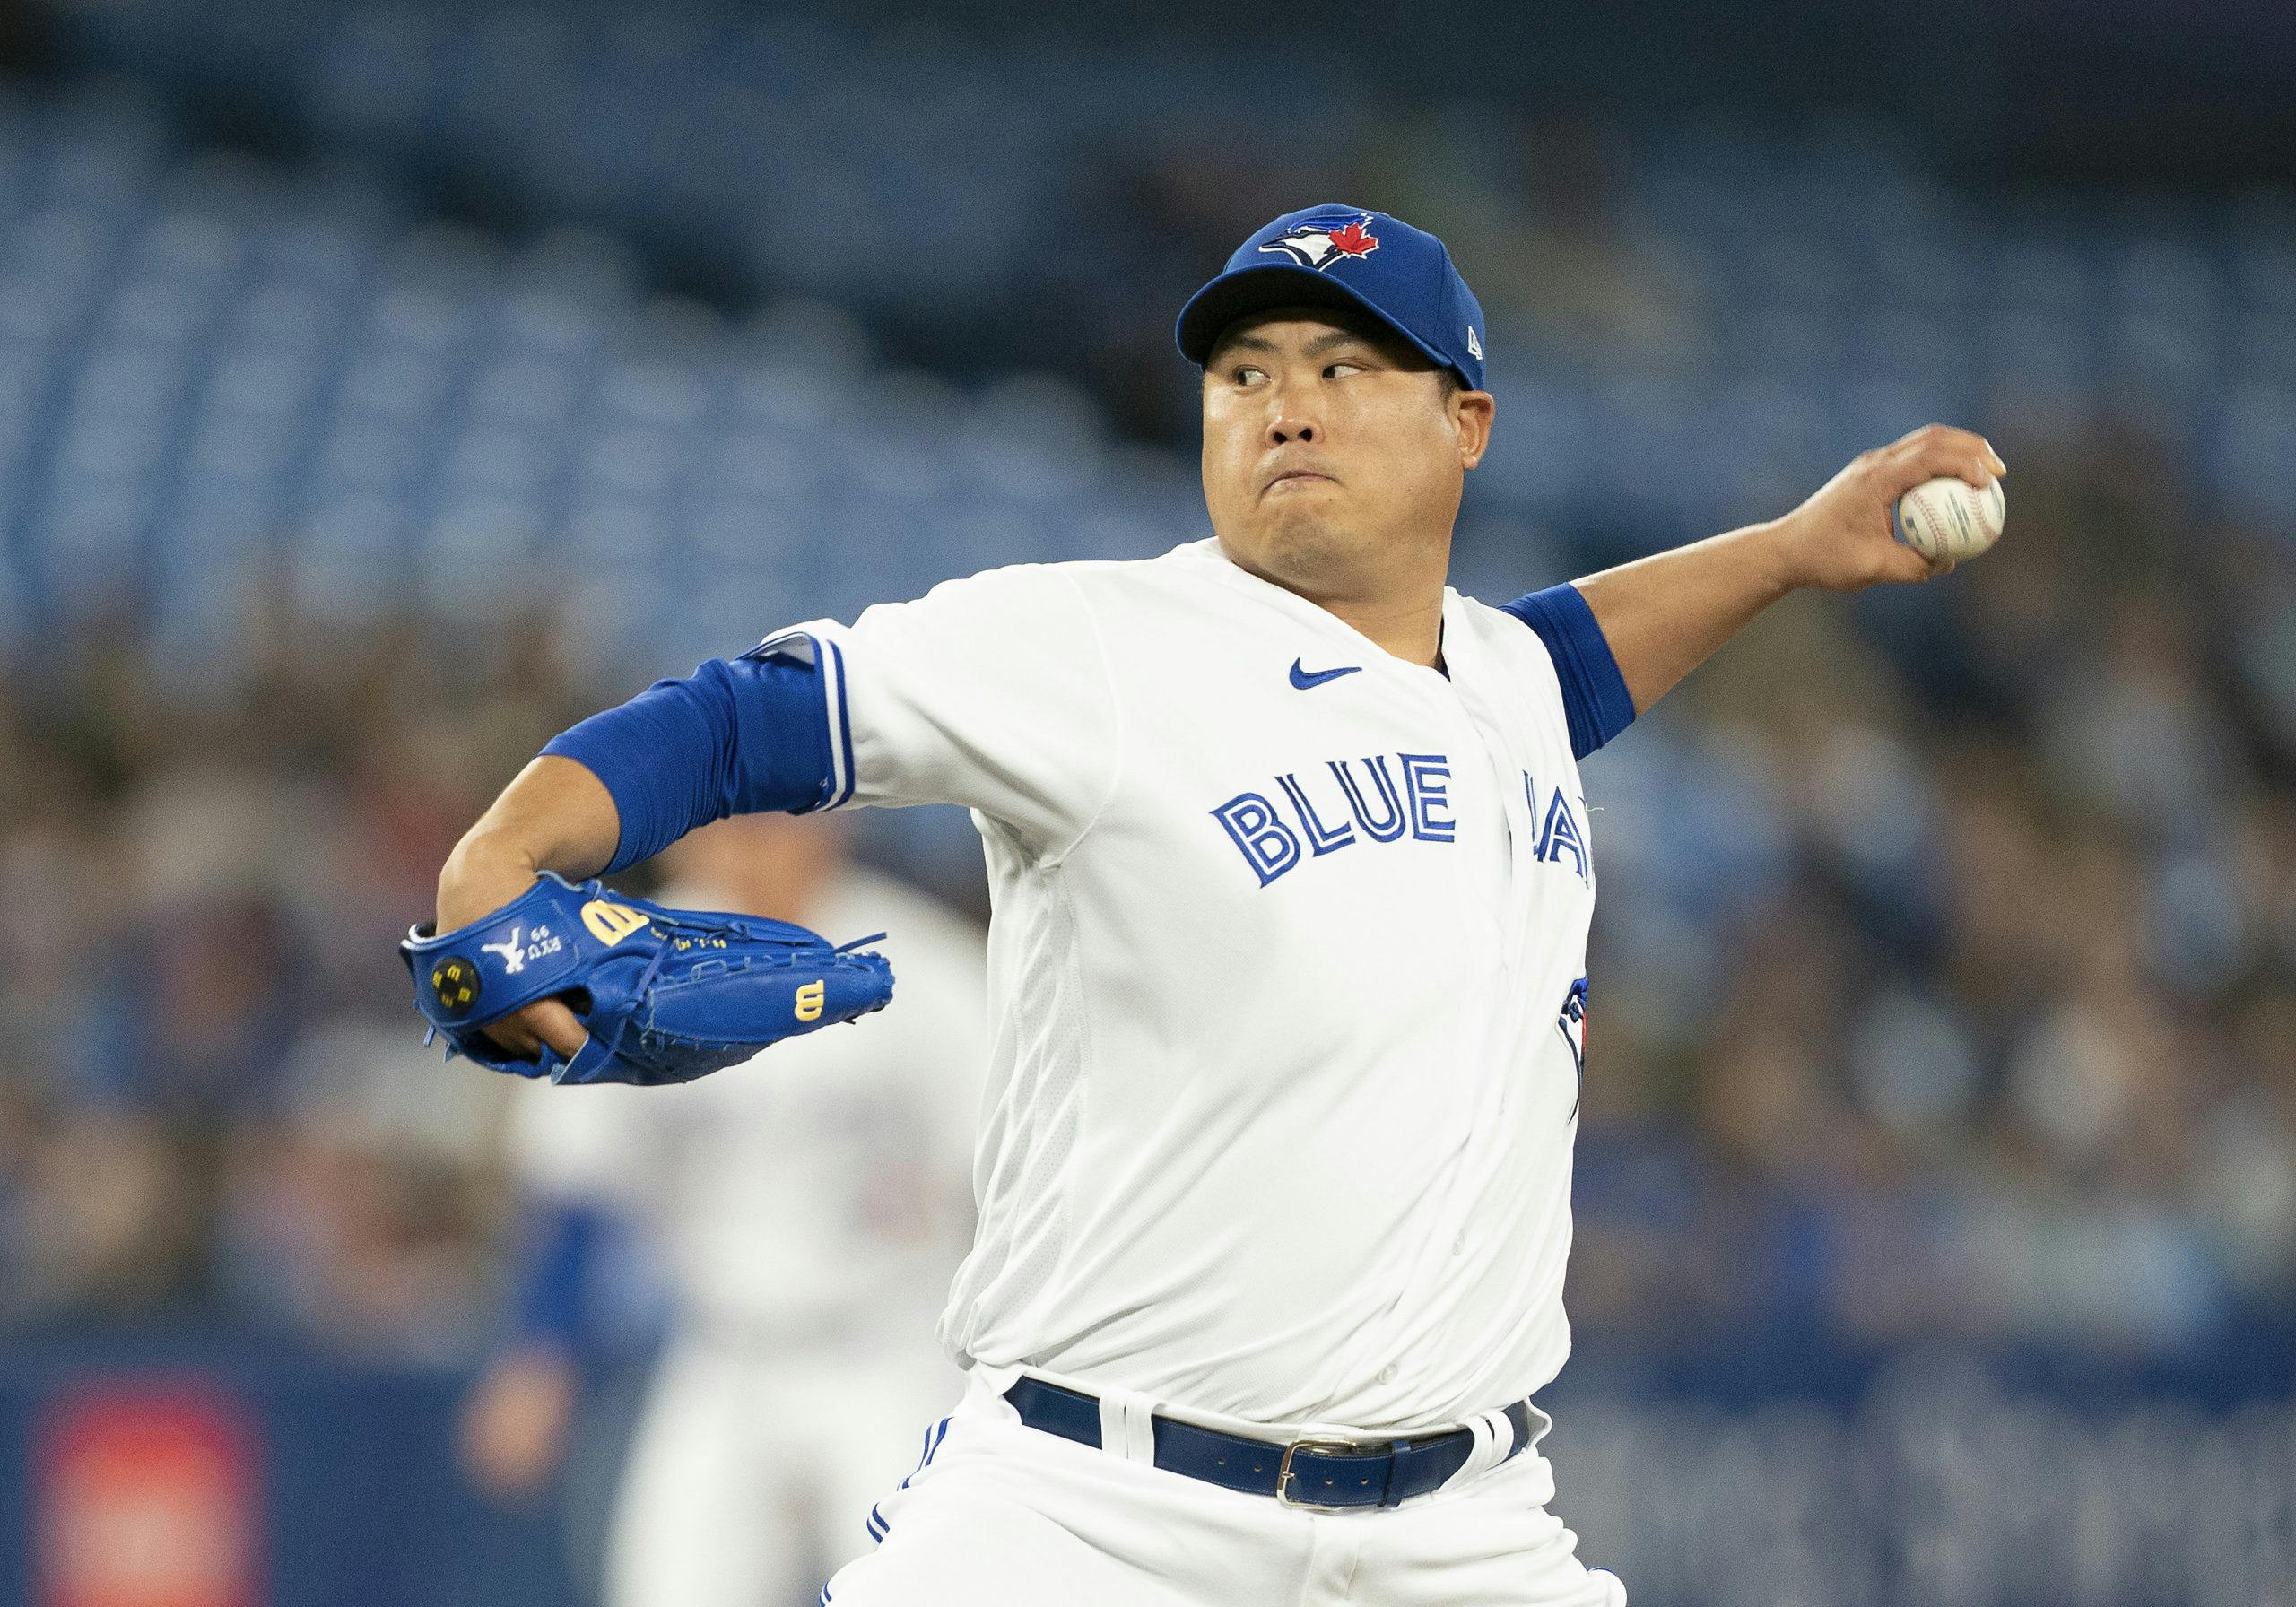 Blue Jays tab newcomer Hyun-Jin Ryu for opening day start in Tampa